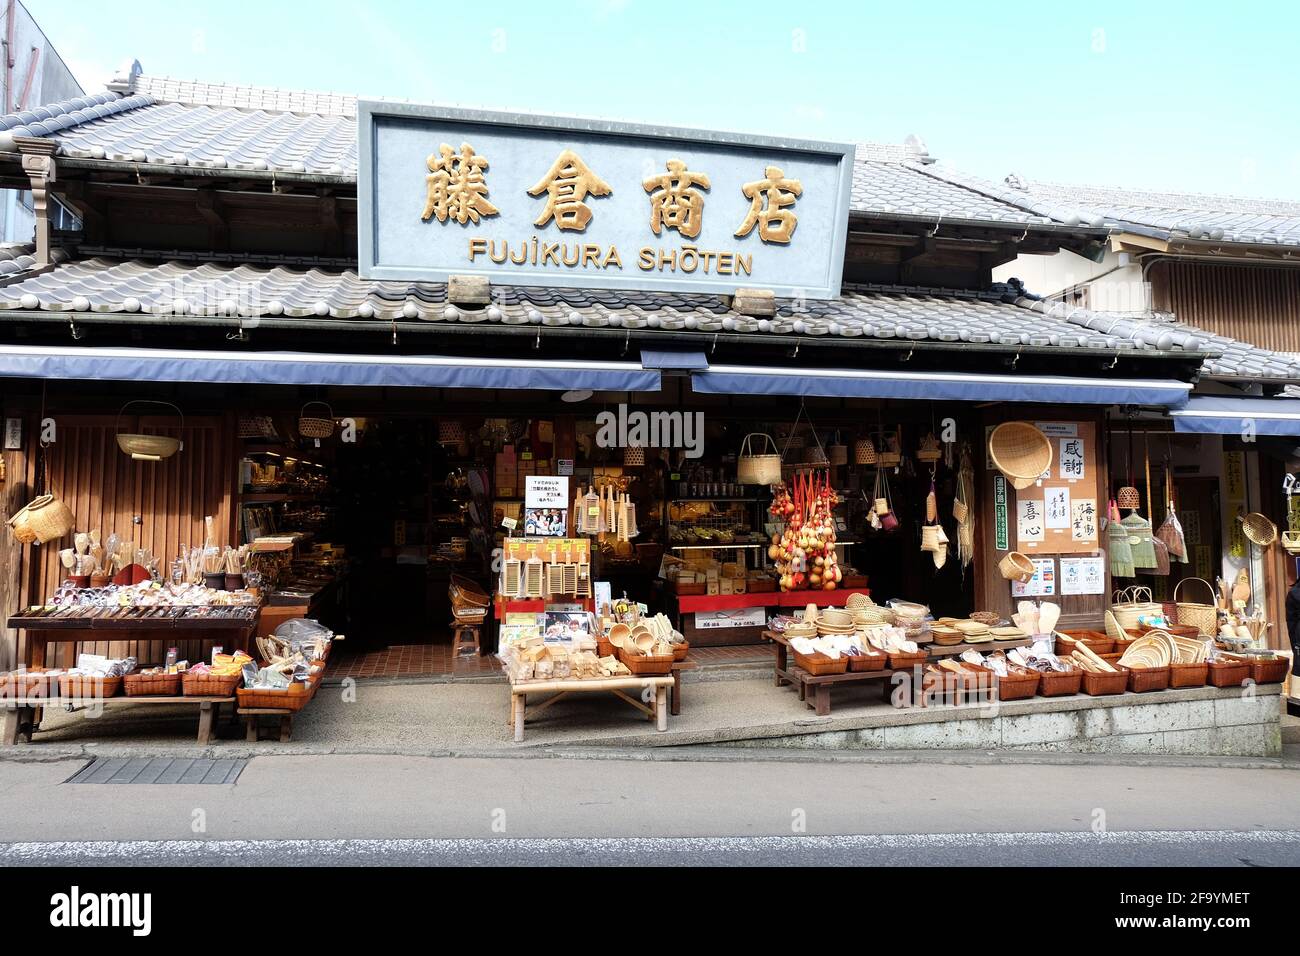 Kitchen utensils and a variety of useful items made from eco-friendly wood and bamboo are for sale at Fujikura Shoten on the route from Narita railway Stock Photo